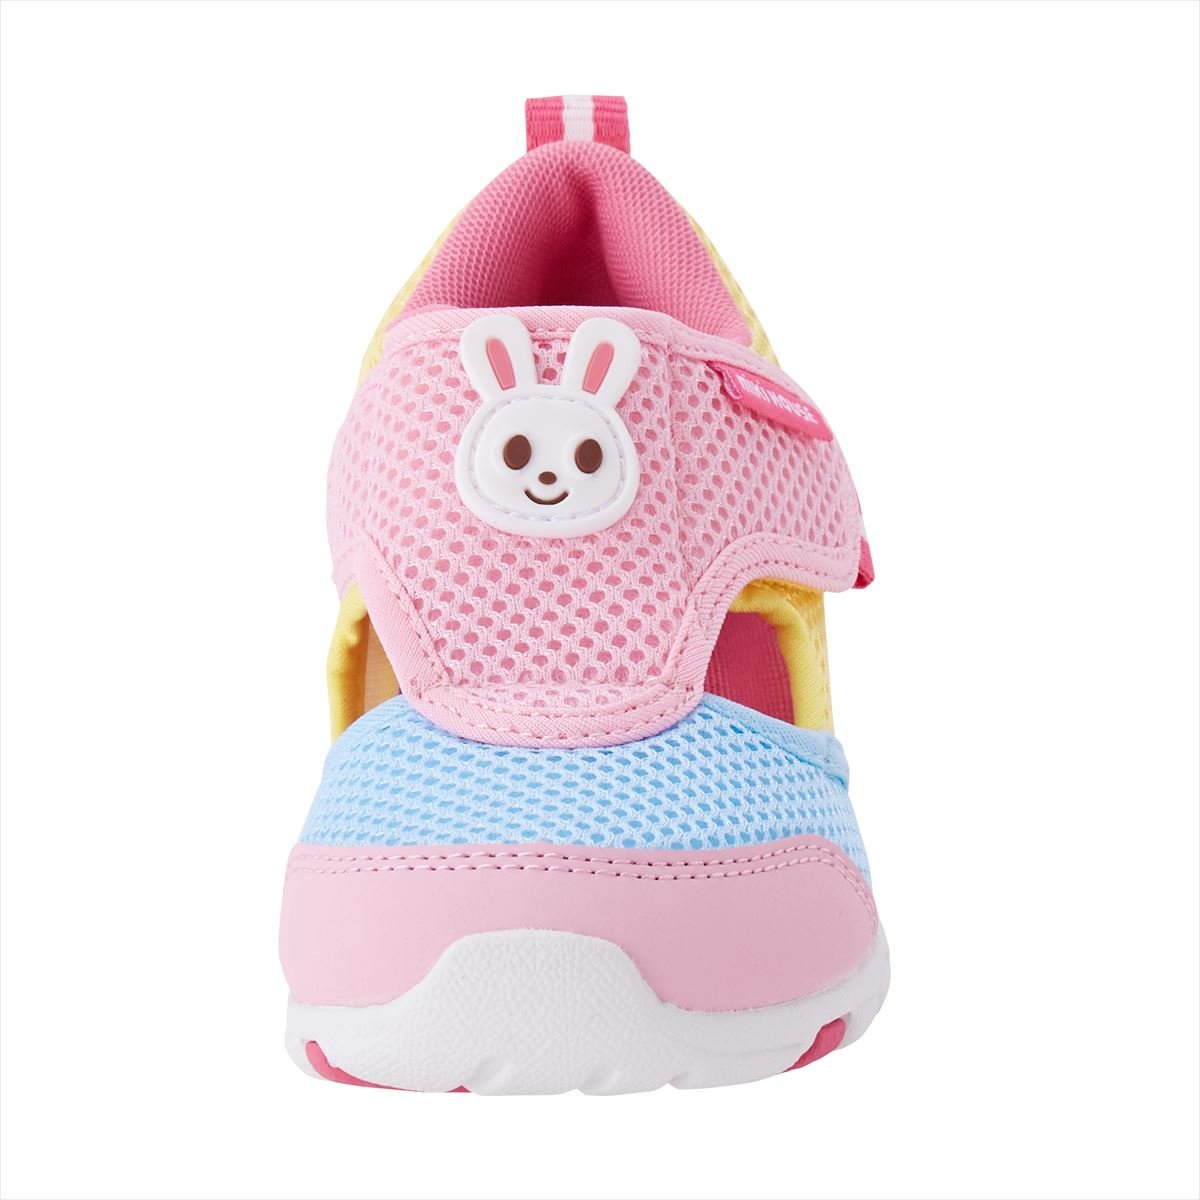 Double Russell Sneakers for Kids - Pretty Pastel - MIKI HOUSE USA